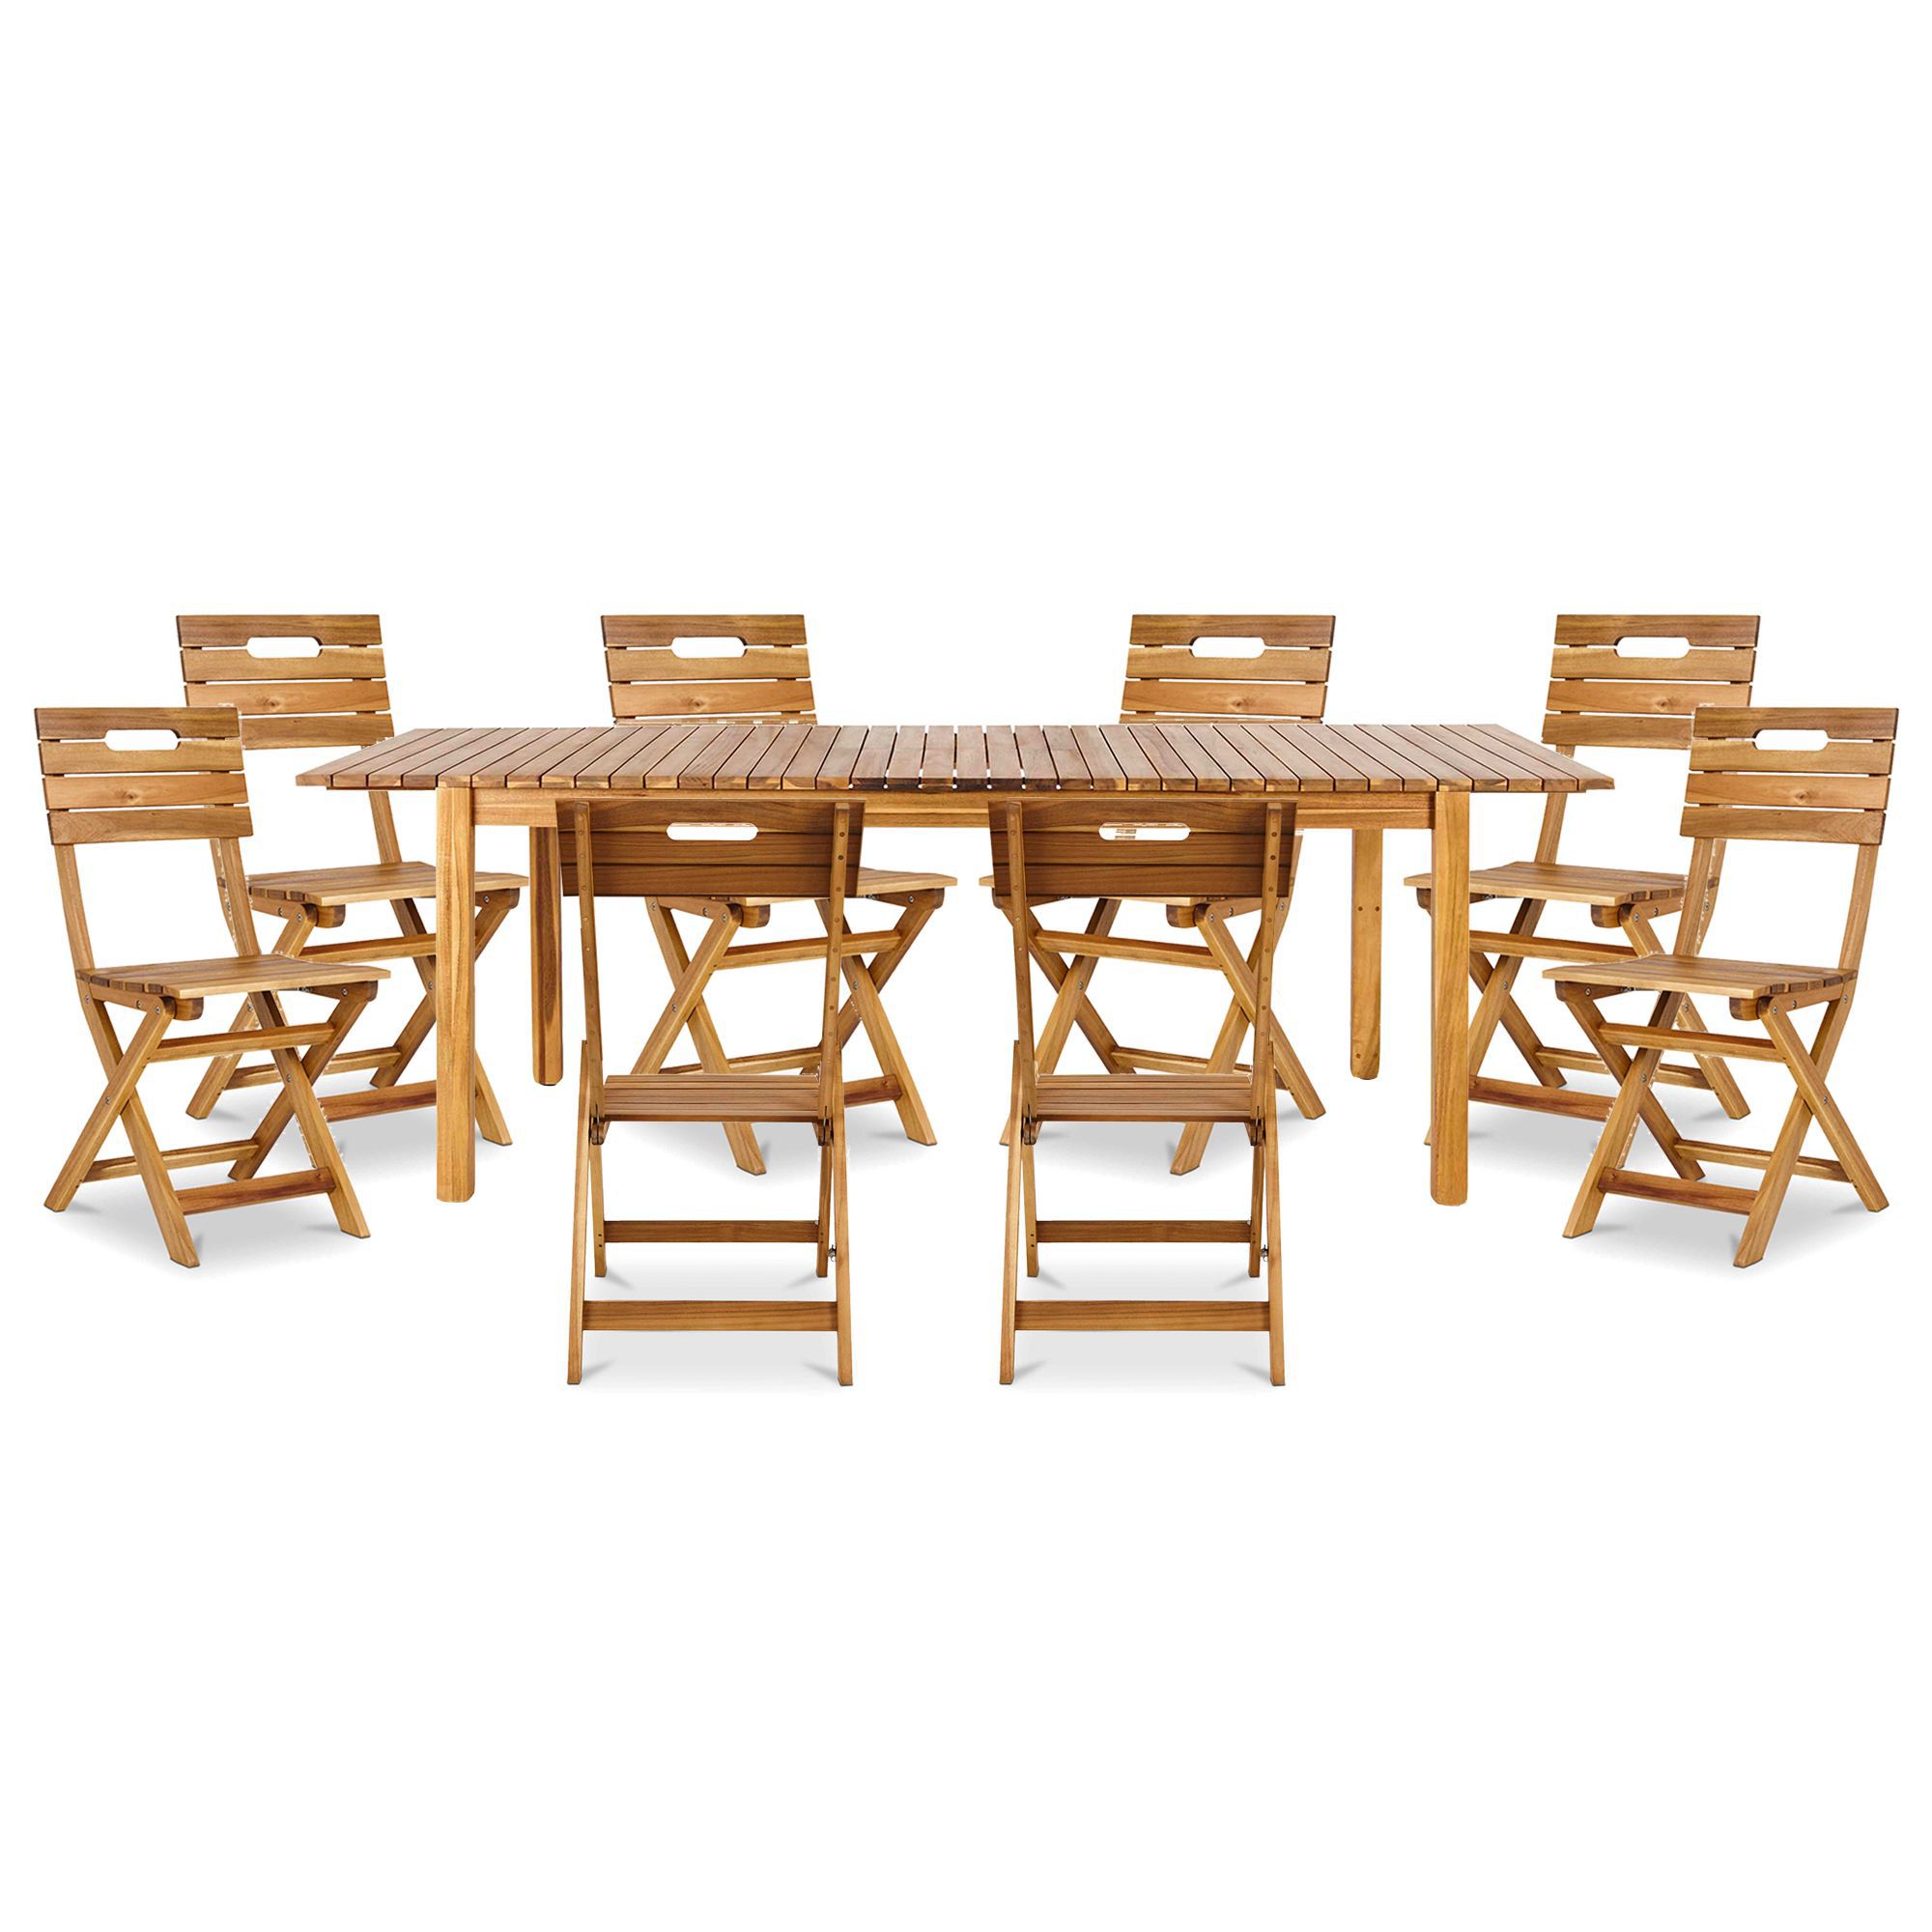 Denia Wooden 8 seater Dining set with Standard chairs